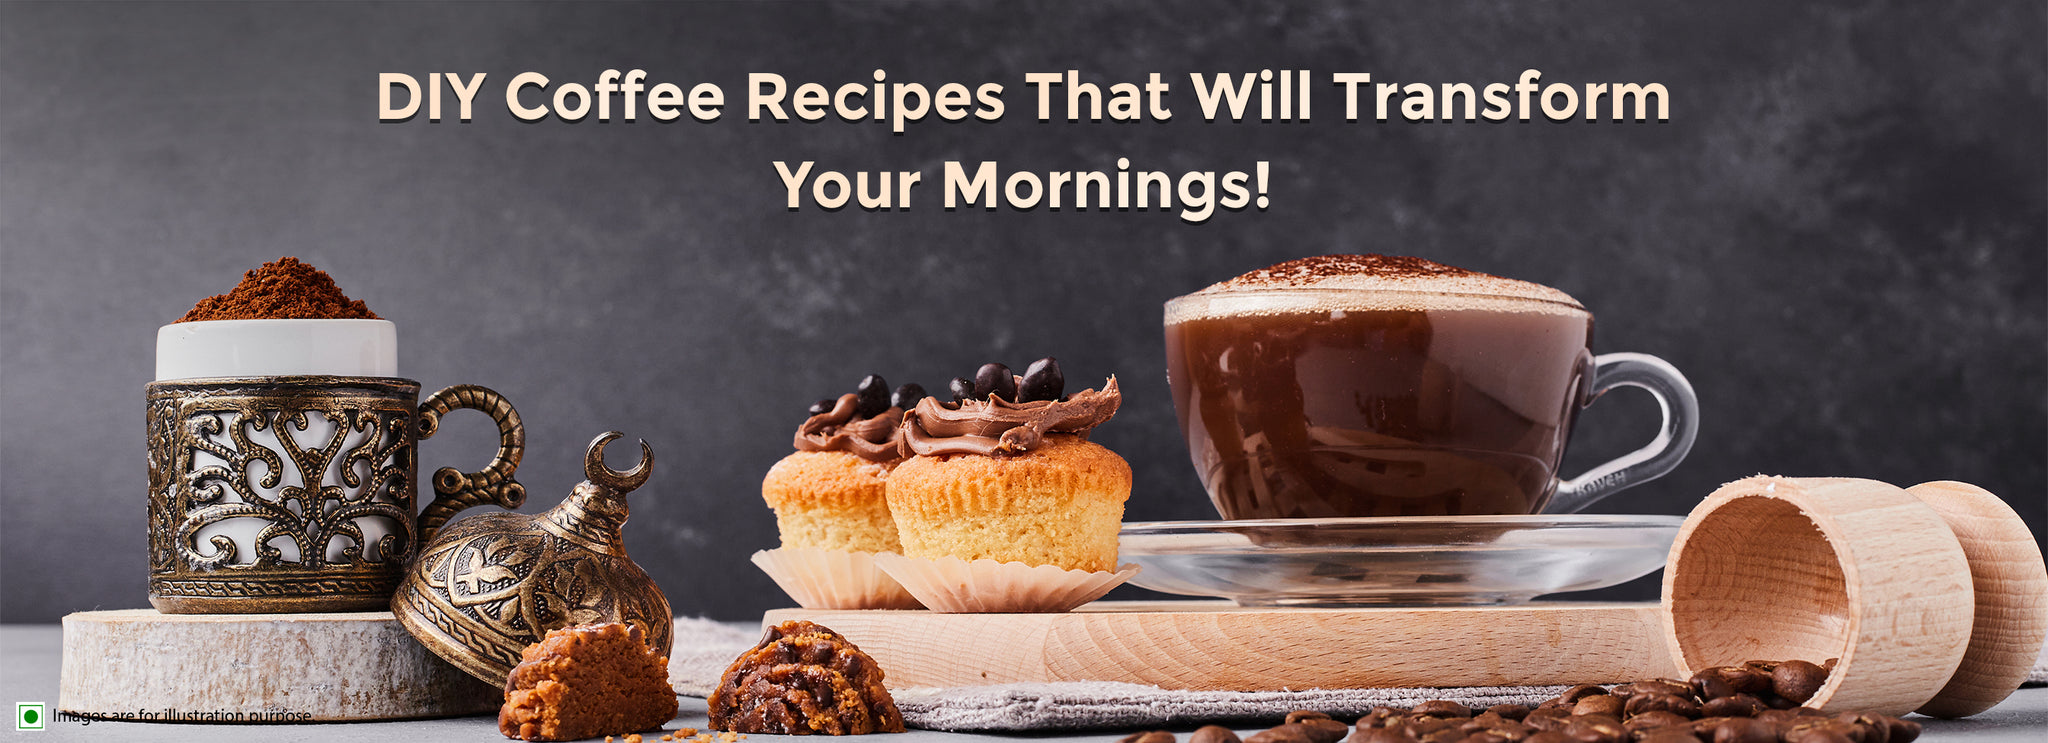 DIY Coffee Recipes That Will Transform Your Mornings!